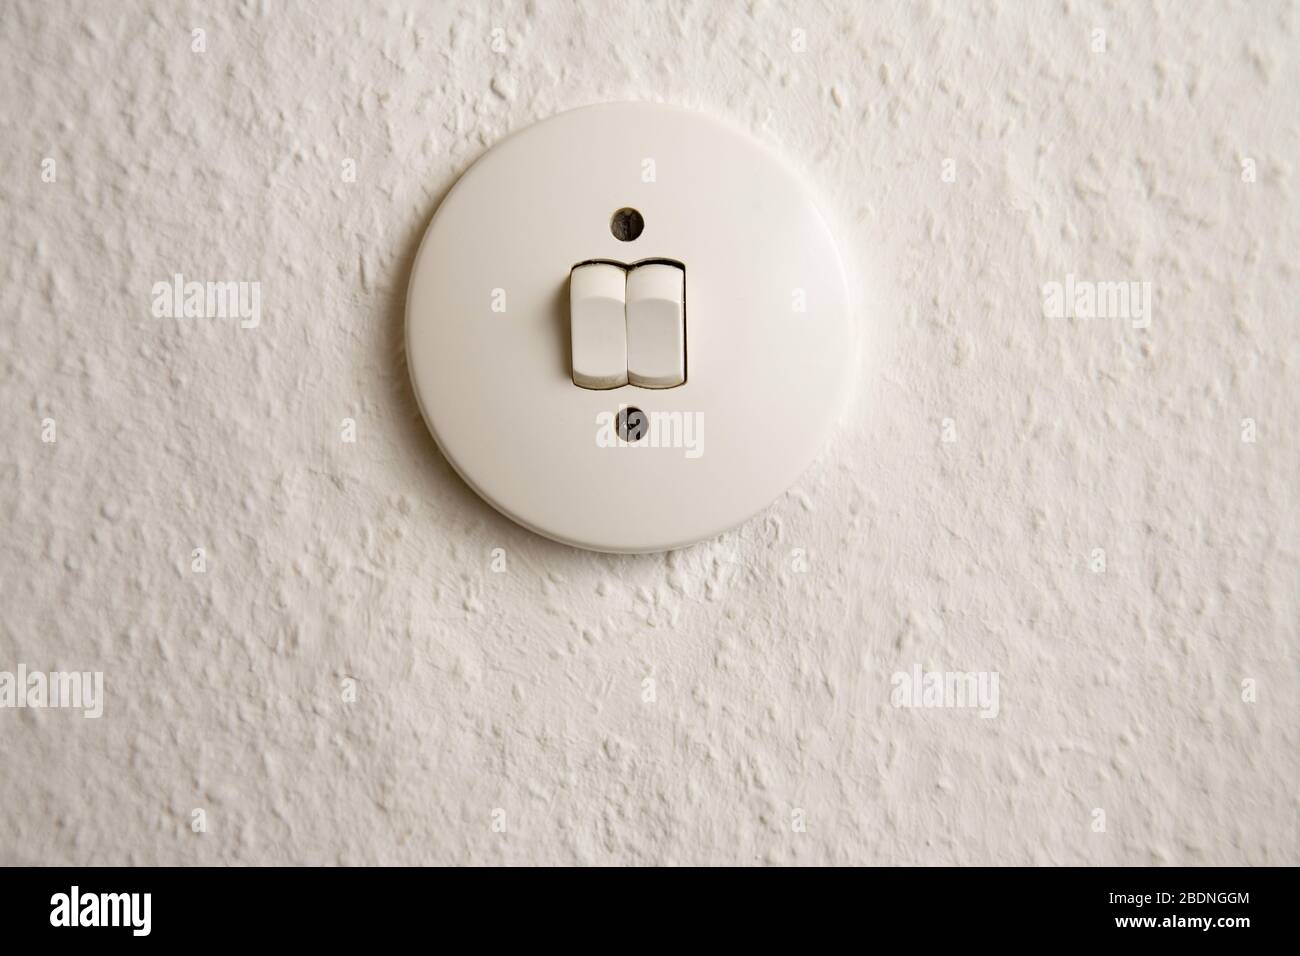 Round light switch on wall with white wallpaper Stock Photo